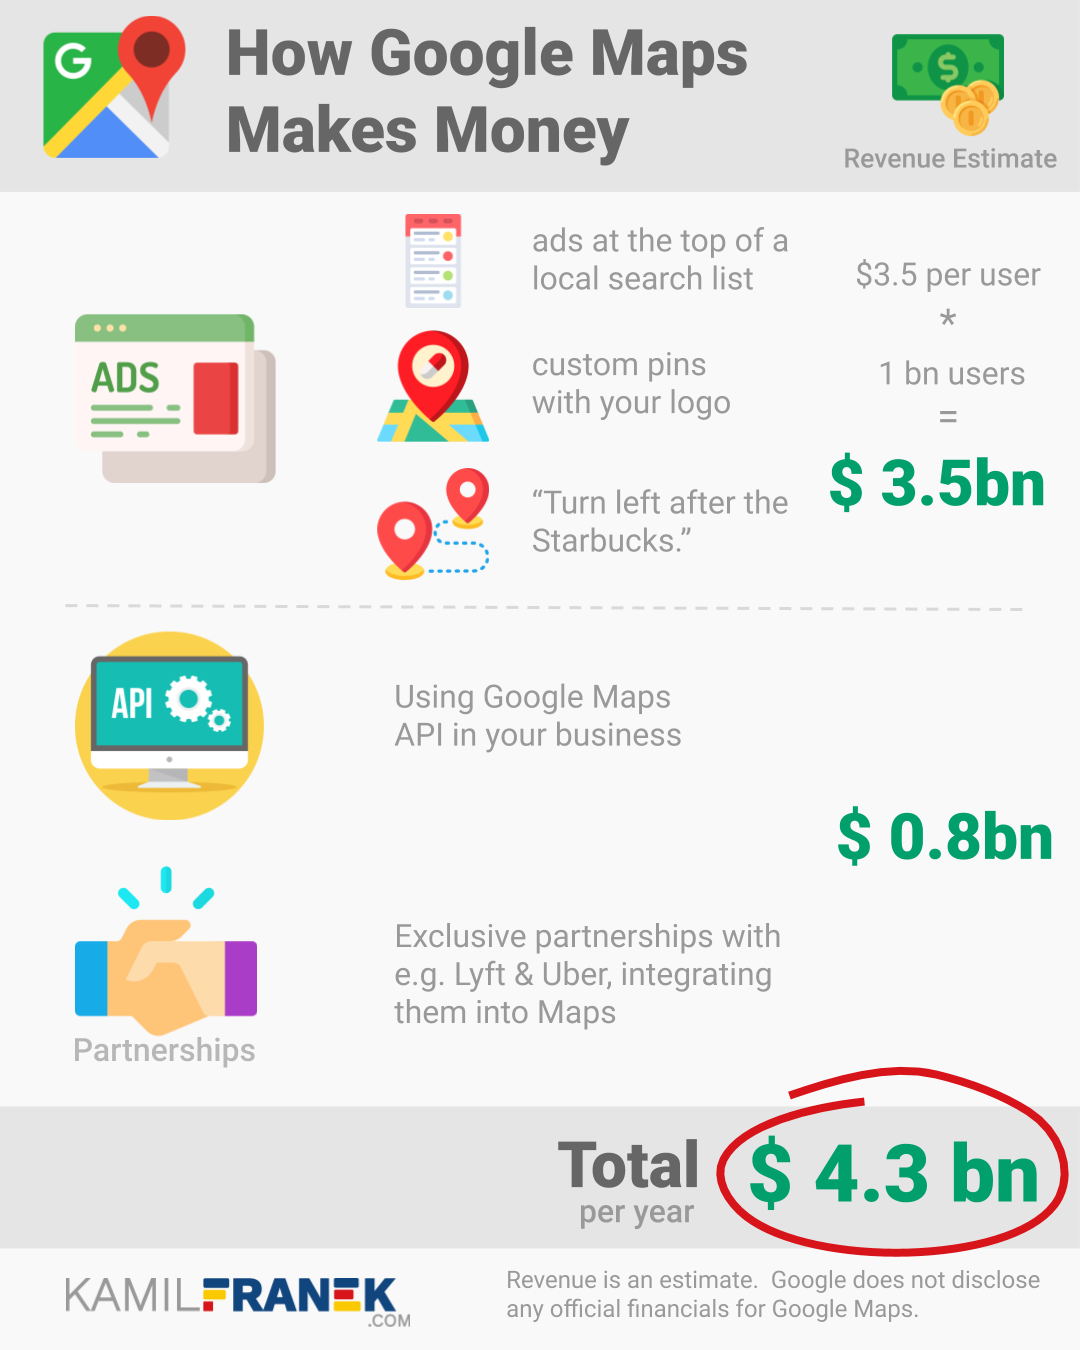 Infographics showing different ways how Google Maps makes money, with revenue estimate for each of them